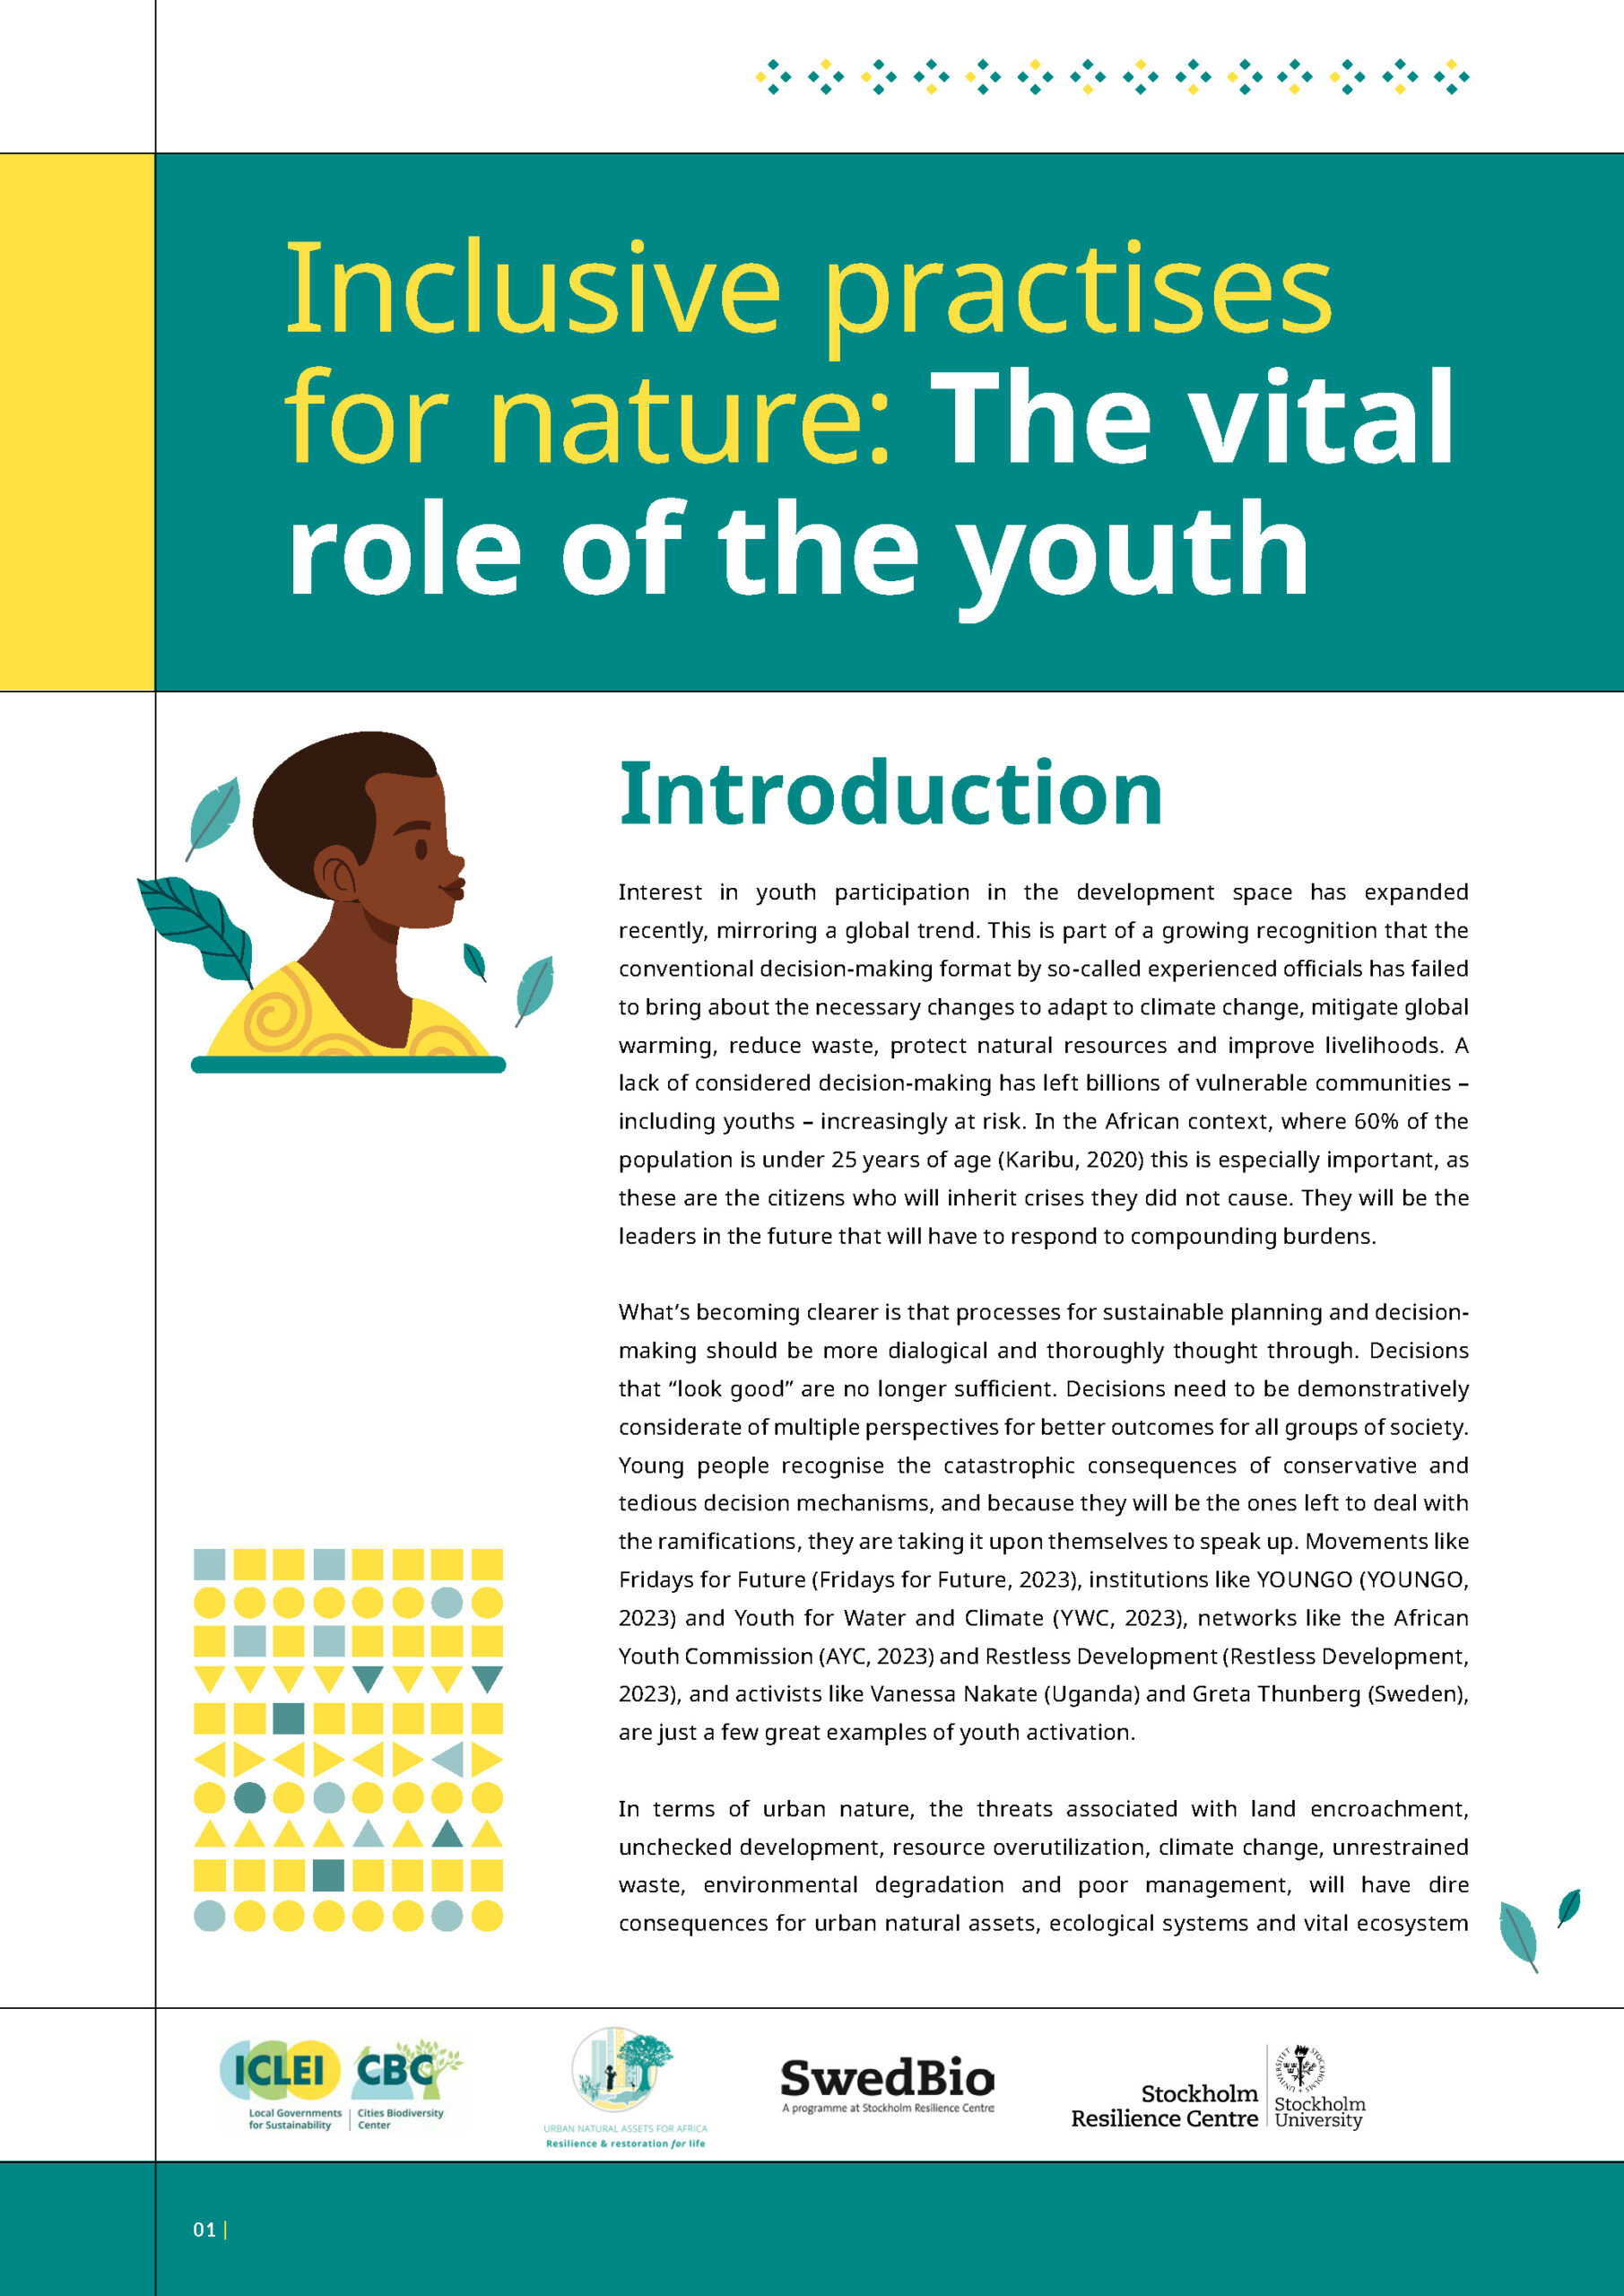 Inclusive practises for nature: The vital role of the youth